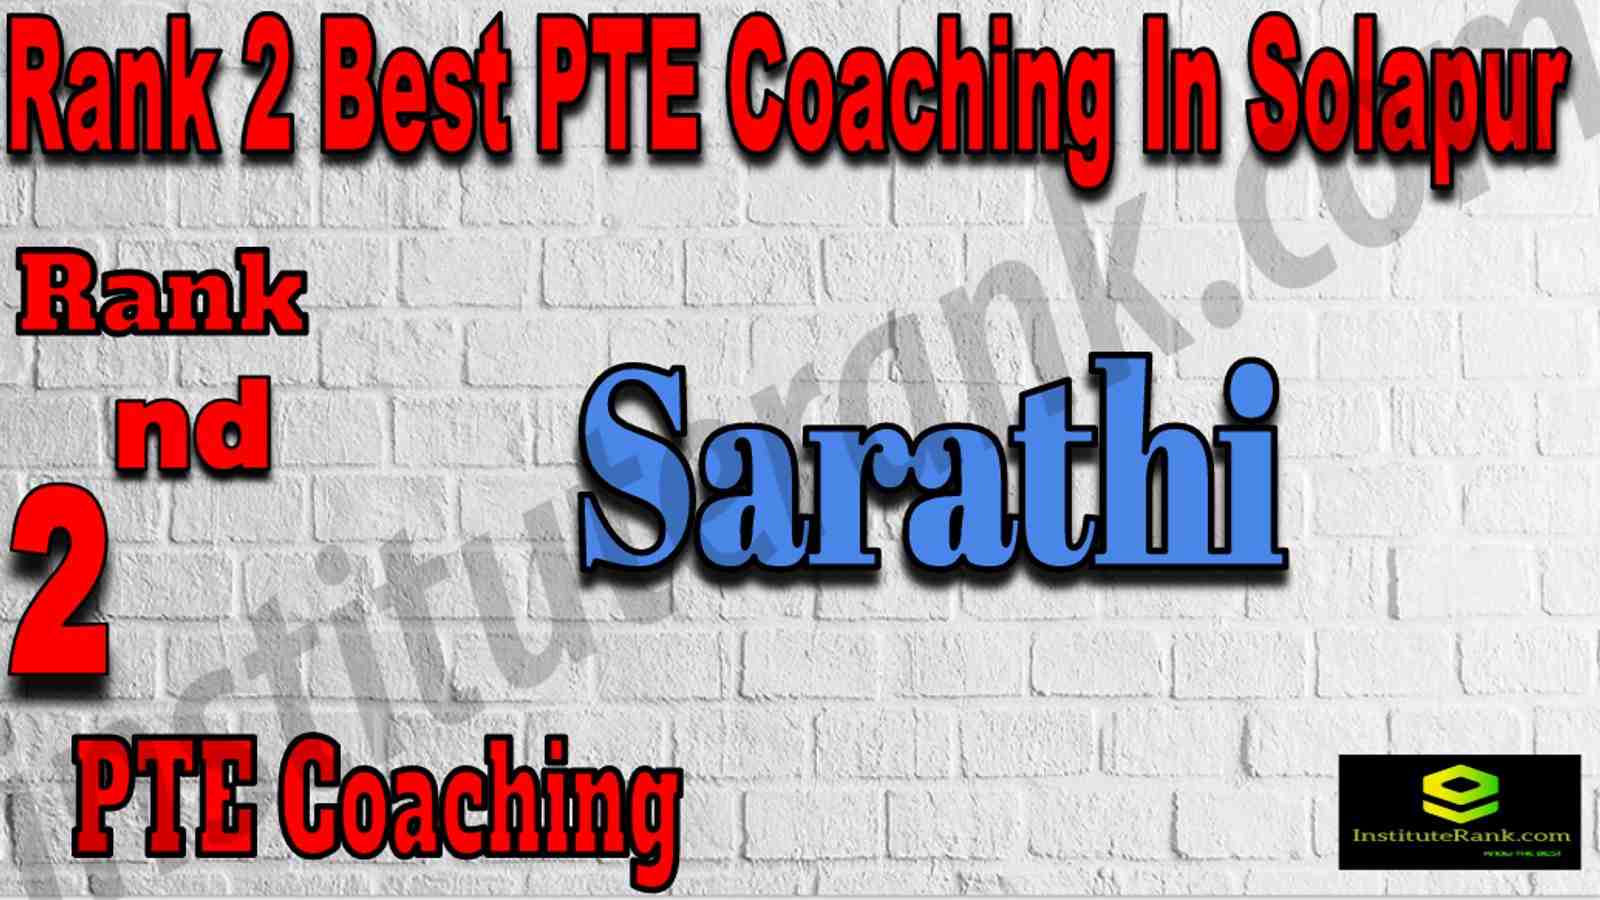 2th Best PTE Coaching In Solapur